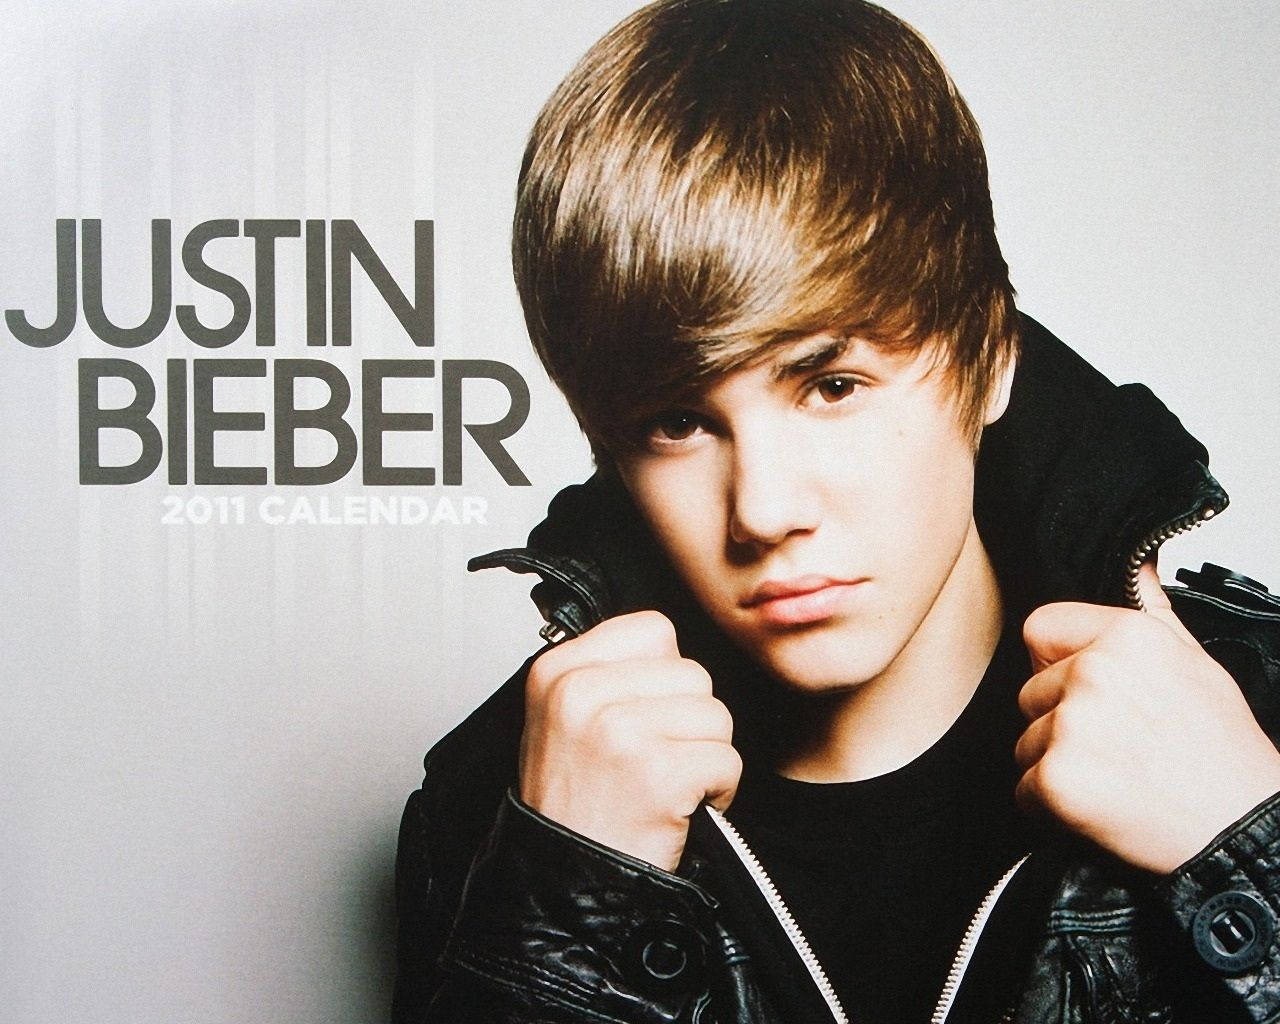 Justin Bieber 1280X1024 Wallpaper and Background Image